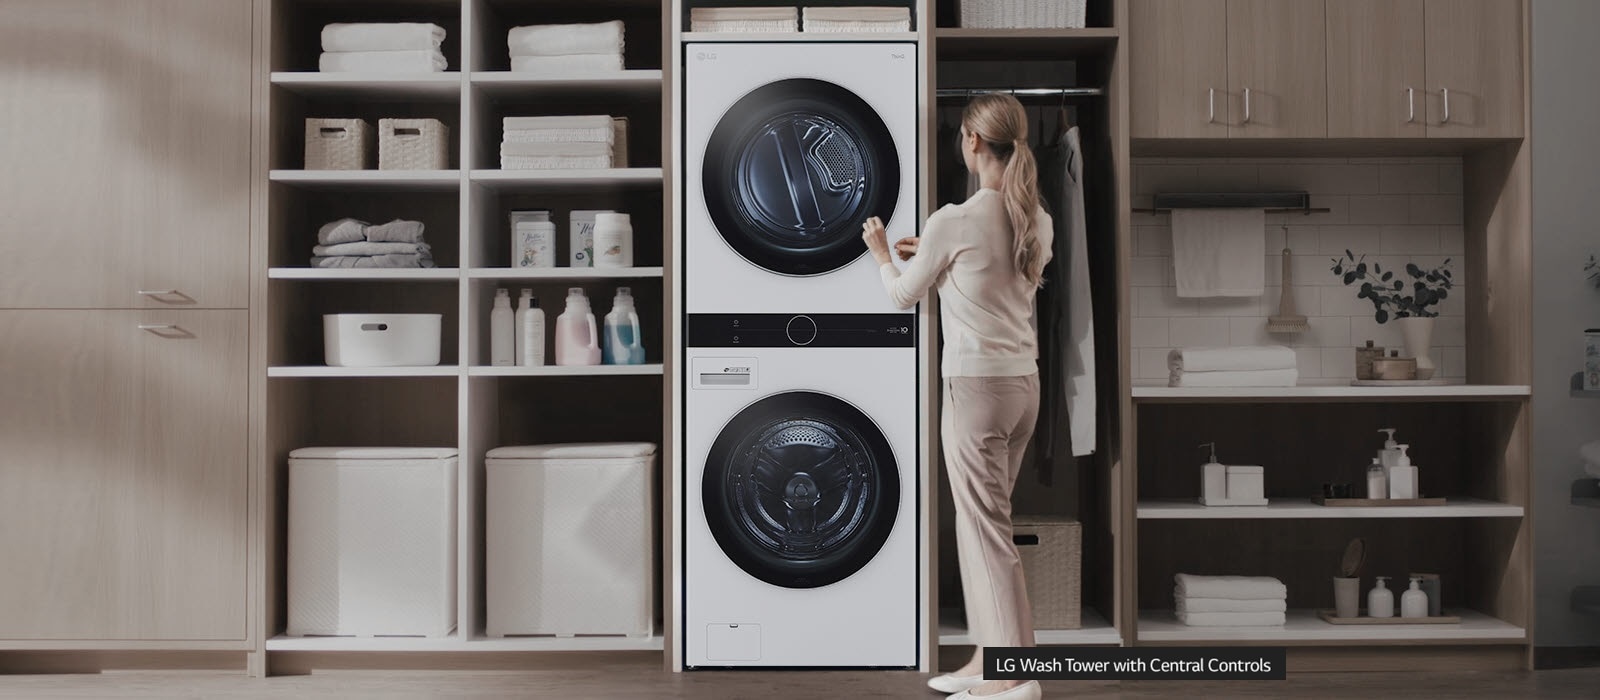 A white washer and dryer are stacked on top of each other and installed in a wall unit with shelves and a closet and a woman has her back facing the front as she reaches up to press a button on the center top control panel. She stands uncomfortably.